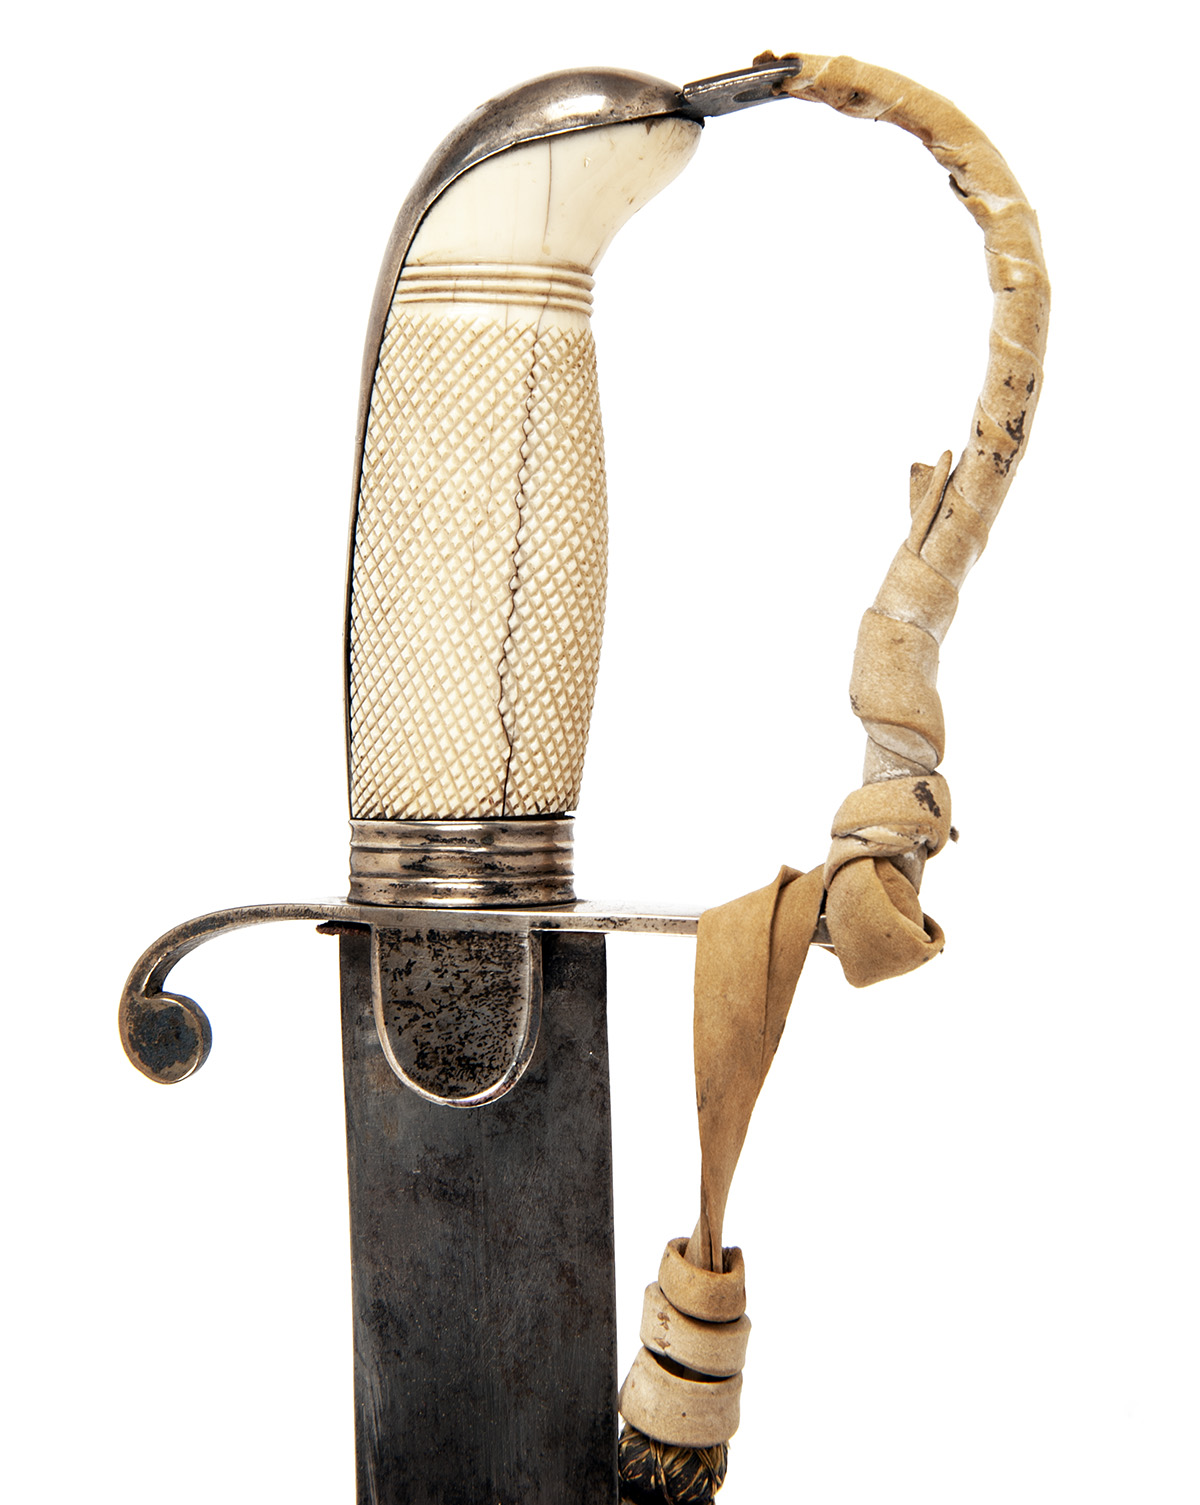 A BRITISH LIGHT CAVALRY OFFICER'S SILVER AND IVORY MOUNTED SWORD, UNSIGNED, circa 1800 but not - Image 2 of 3